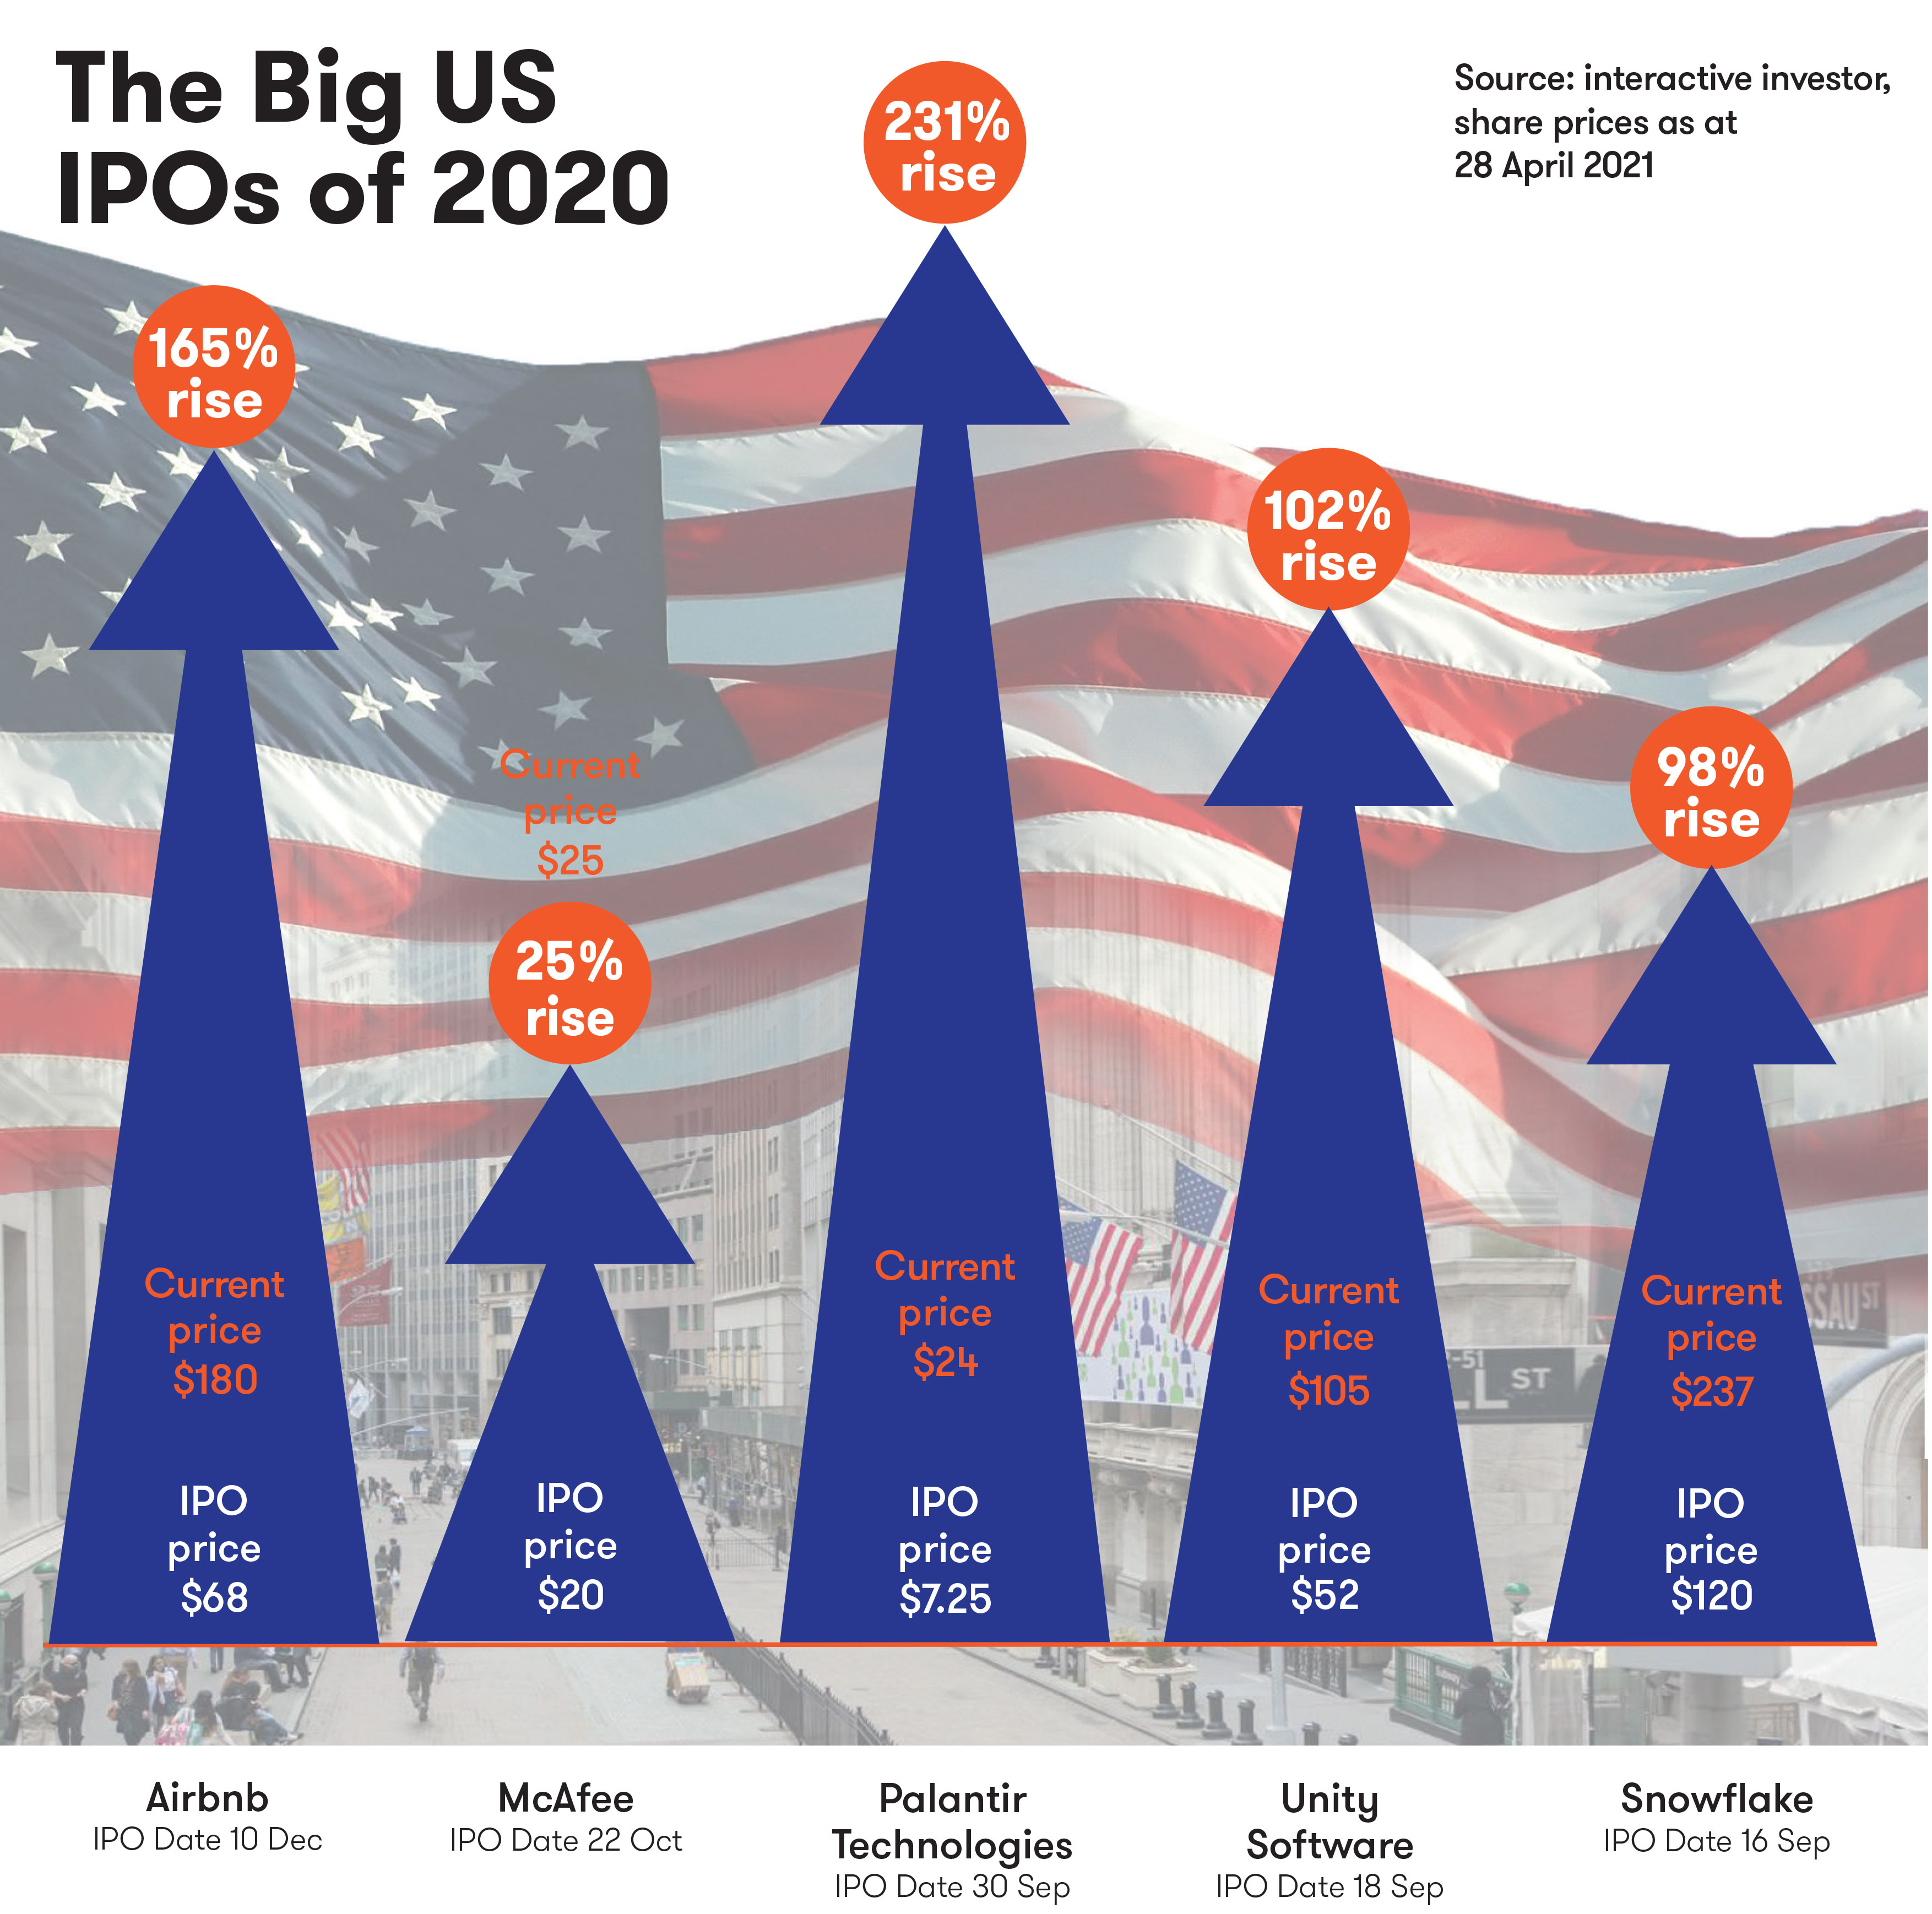 The Big US IPOs of 2020